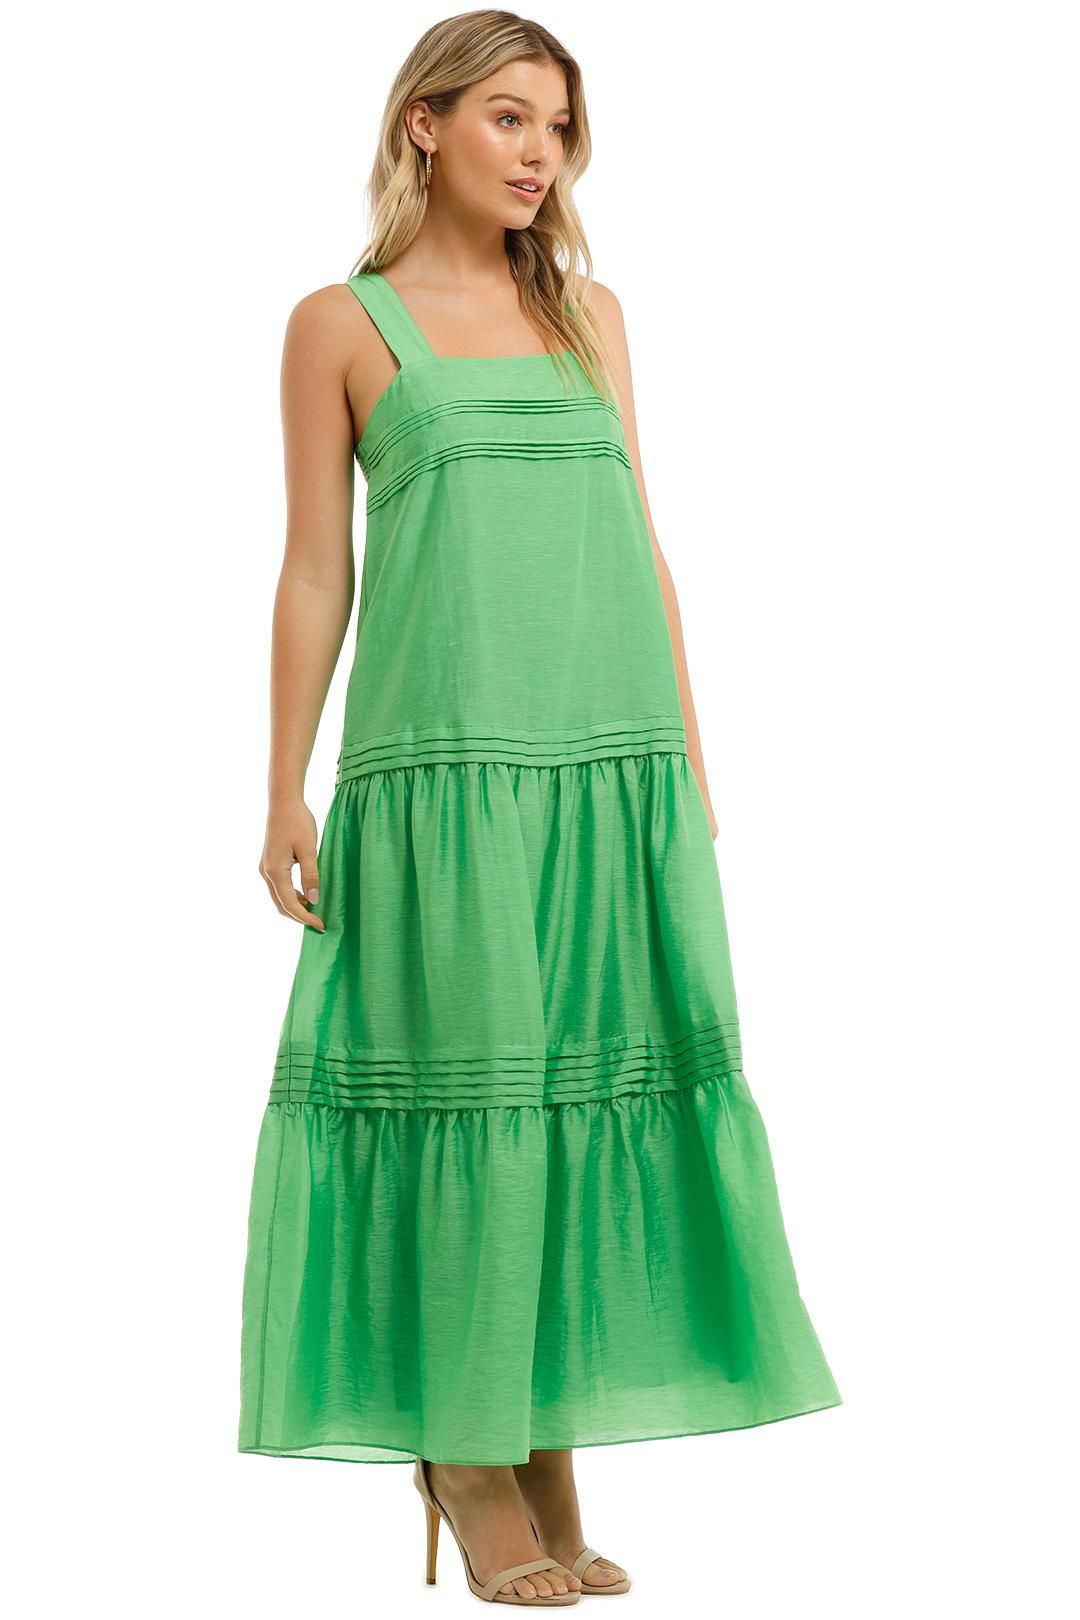 Pintuck Maxi Dress in Jewel Green by Witchery for Hire | GlamCorner